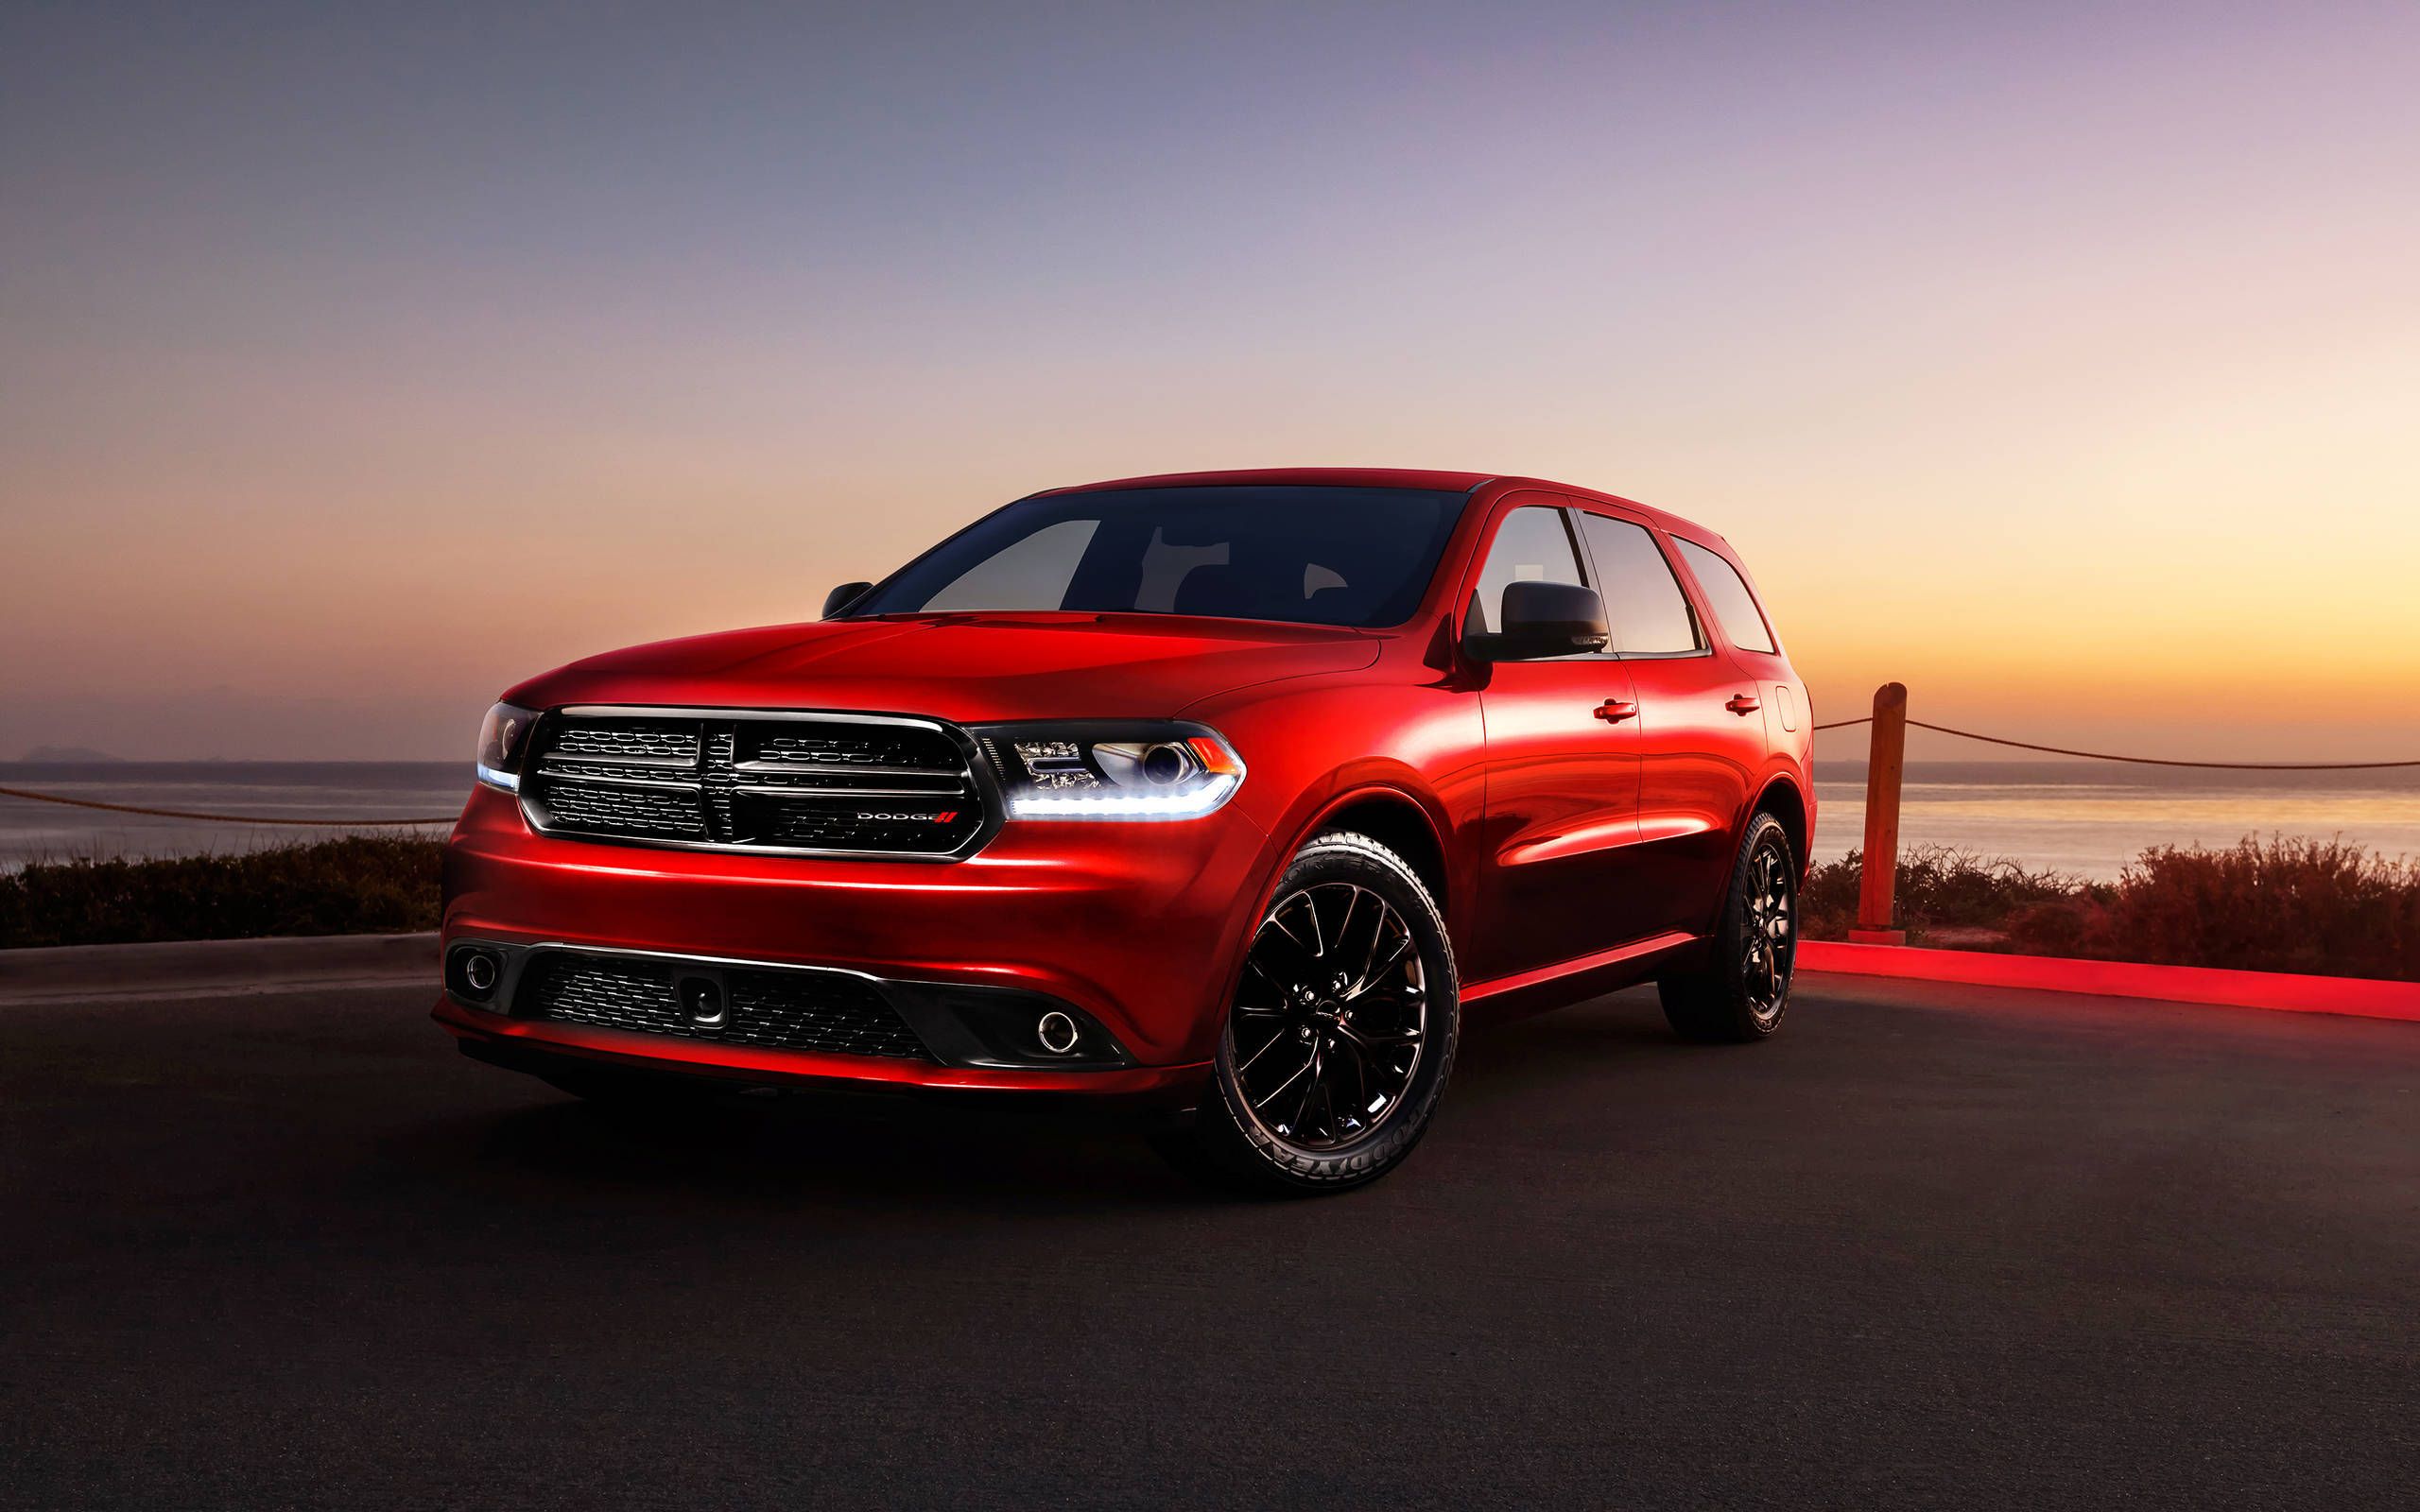 2015 Dodge Durango R/T review notes: Interior luxury for three (rows)